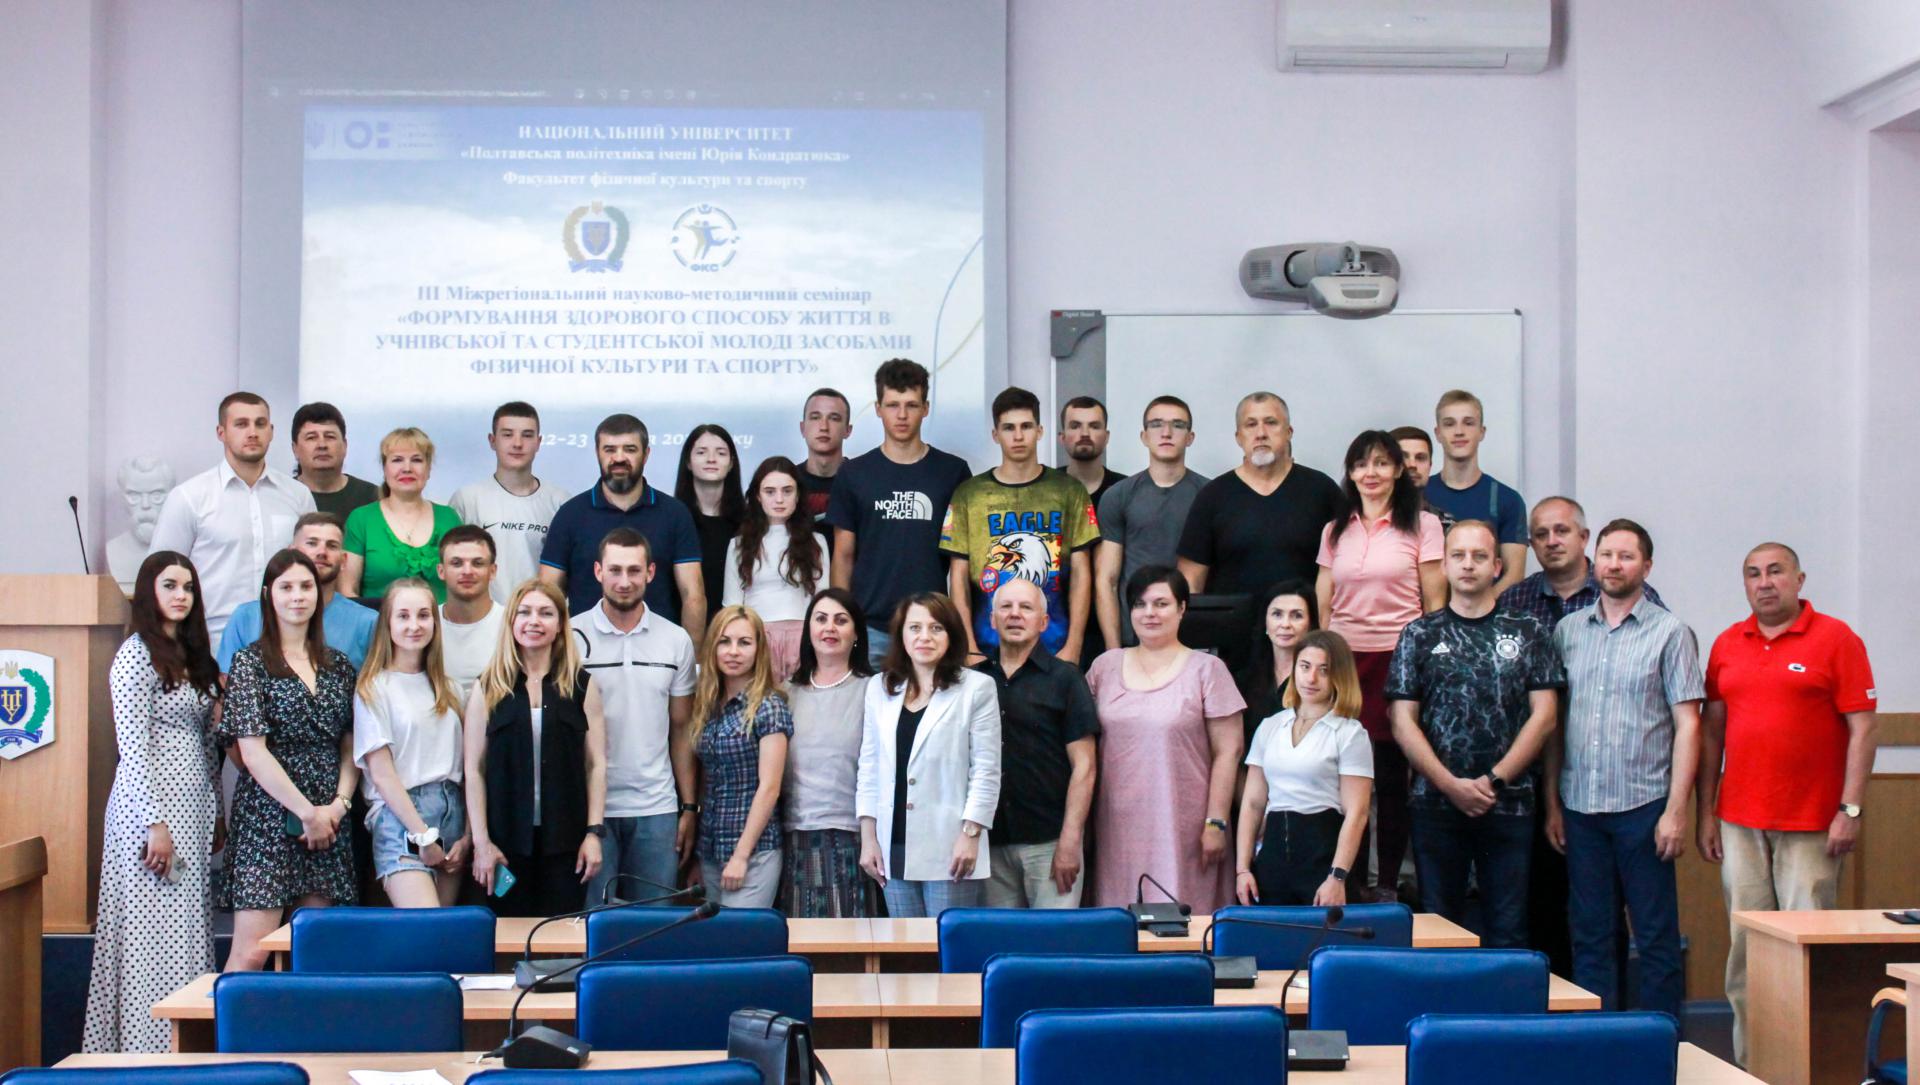 Poltava Polytechnic hosts an interregional scientific and methodical seminar dedicated to the promotion of a healthy lifestyle among young people